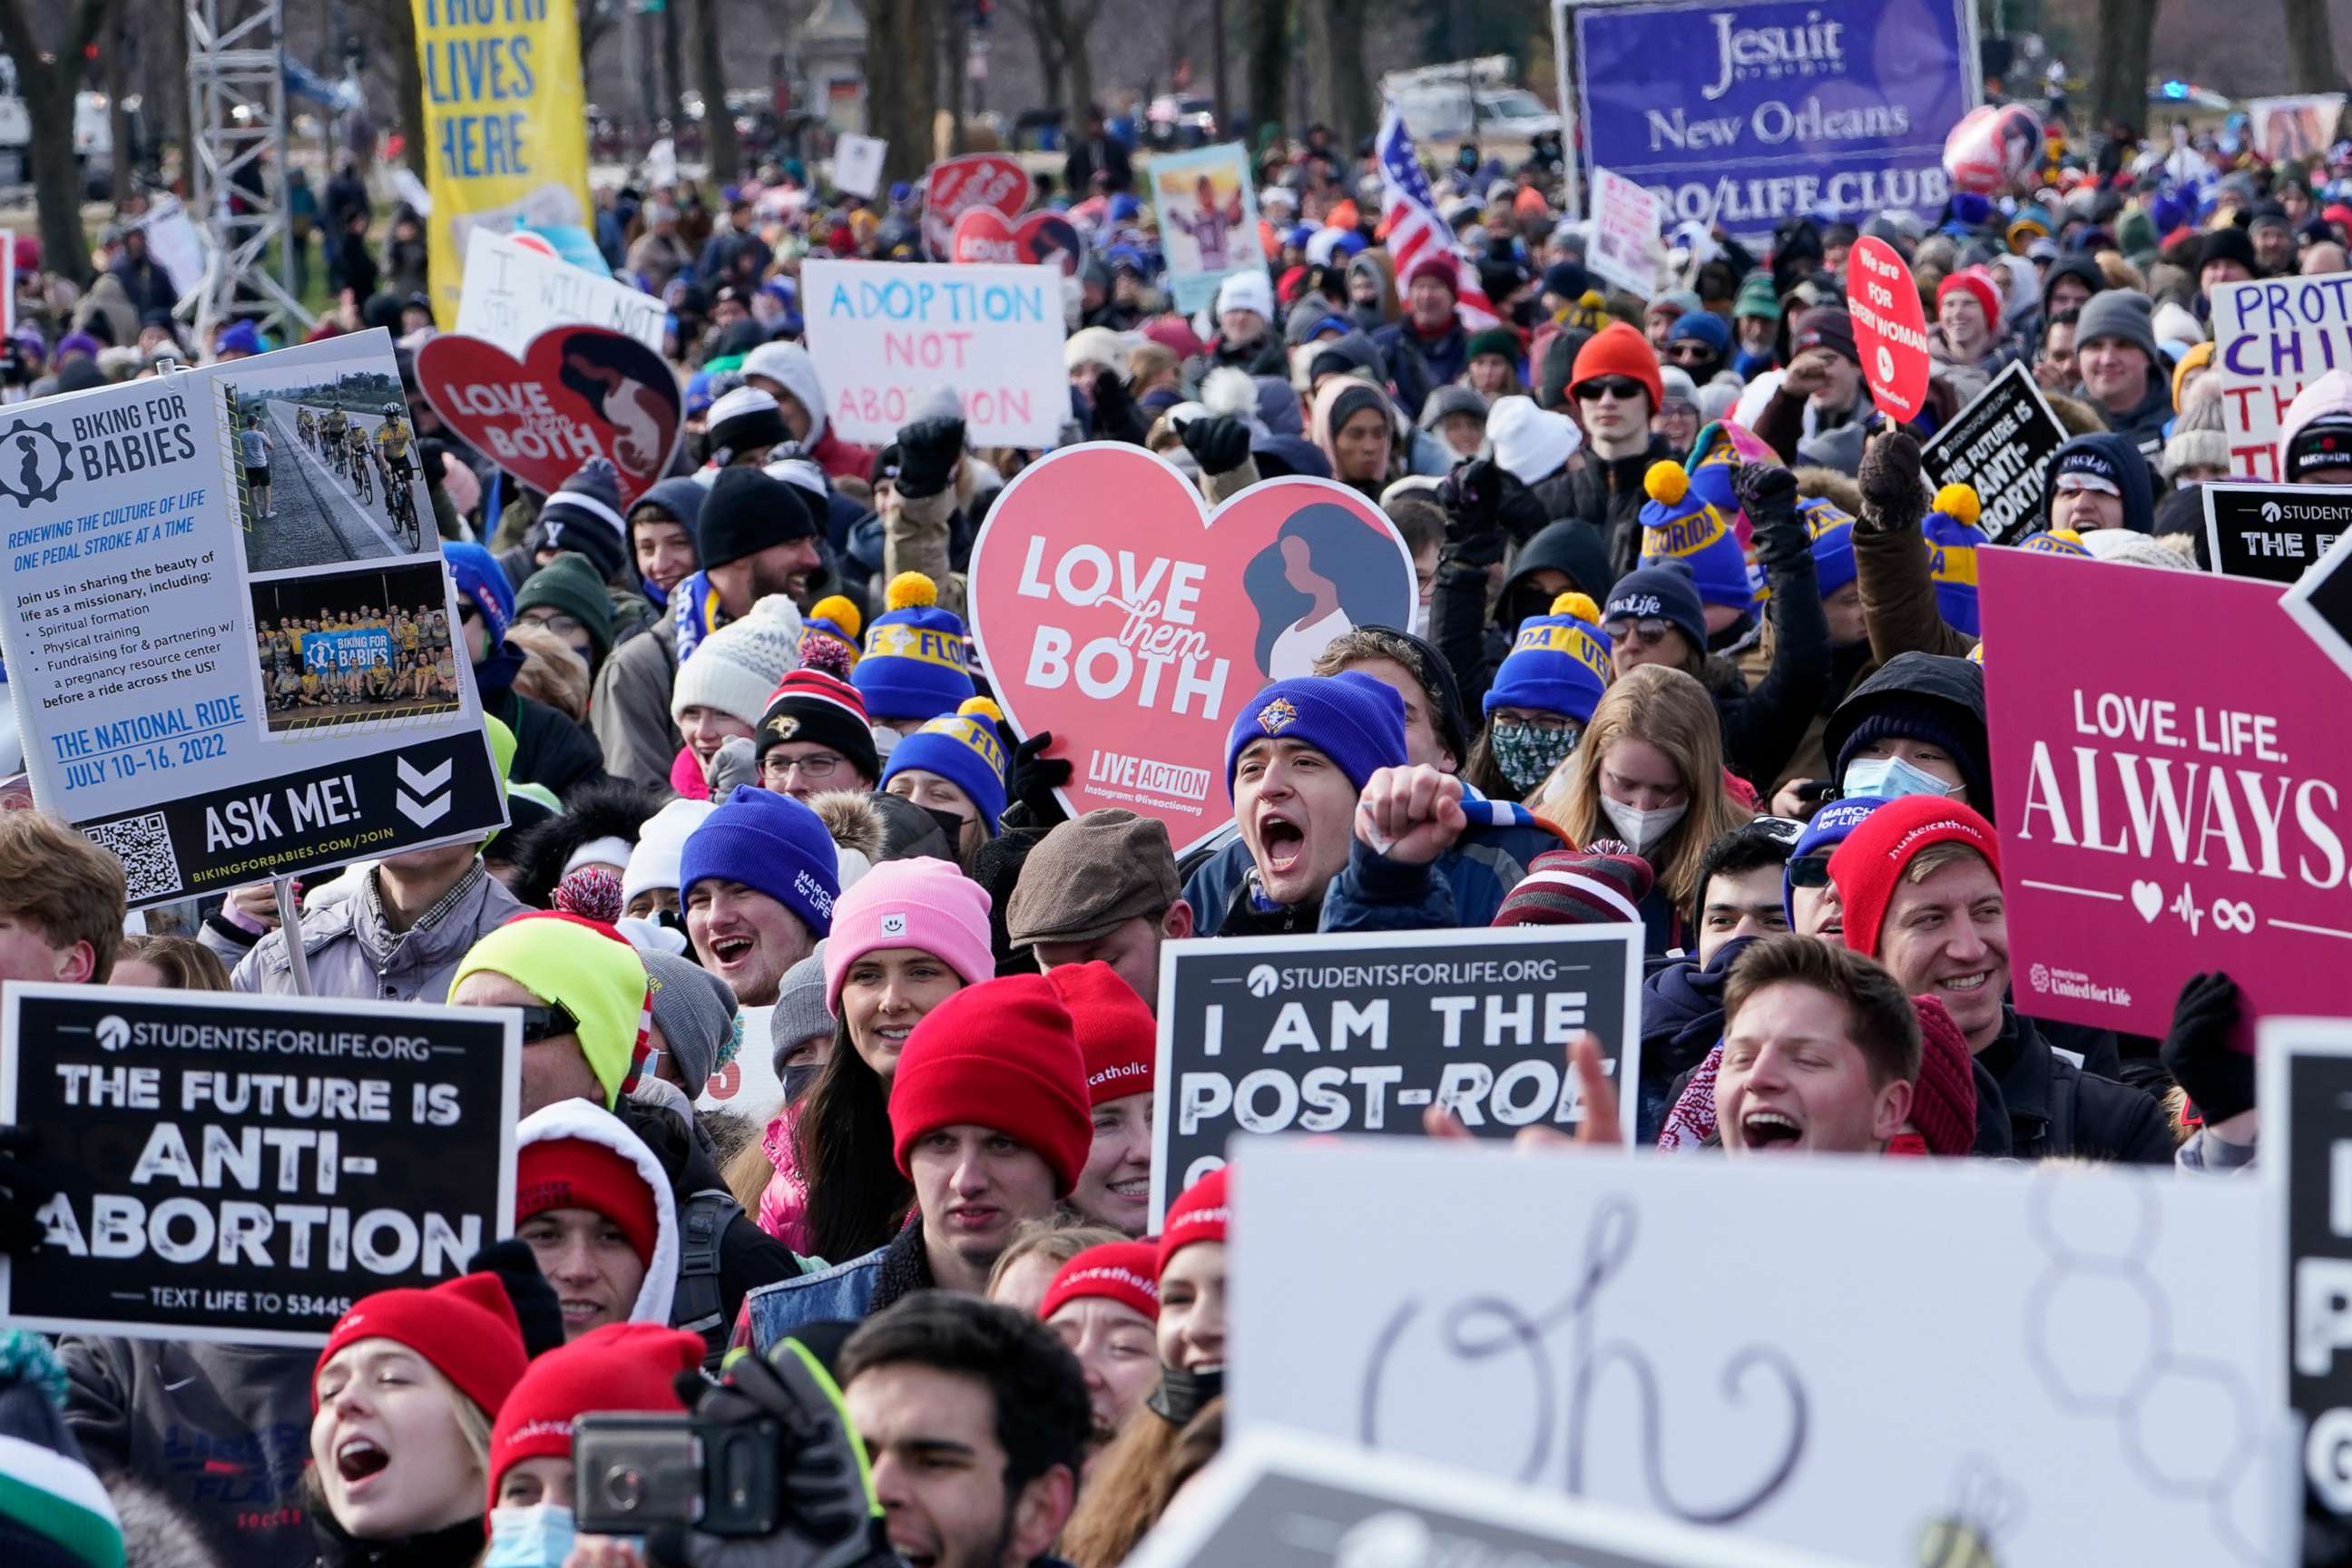 PHOTO: People attend the March for Life rally on the National Mall in Washington, D.C., Jan. 21, 2022.